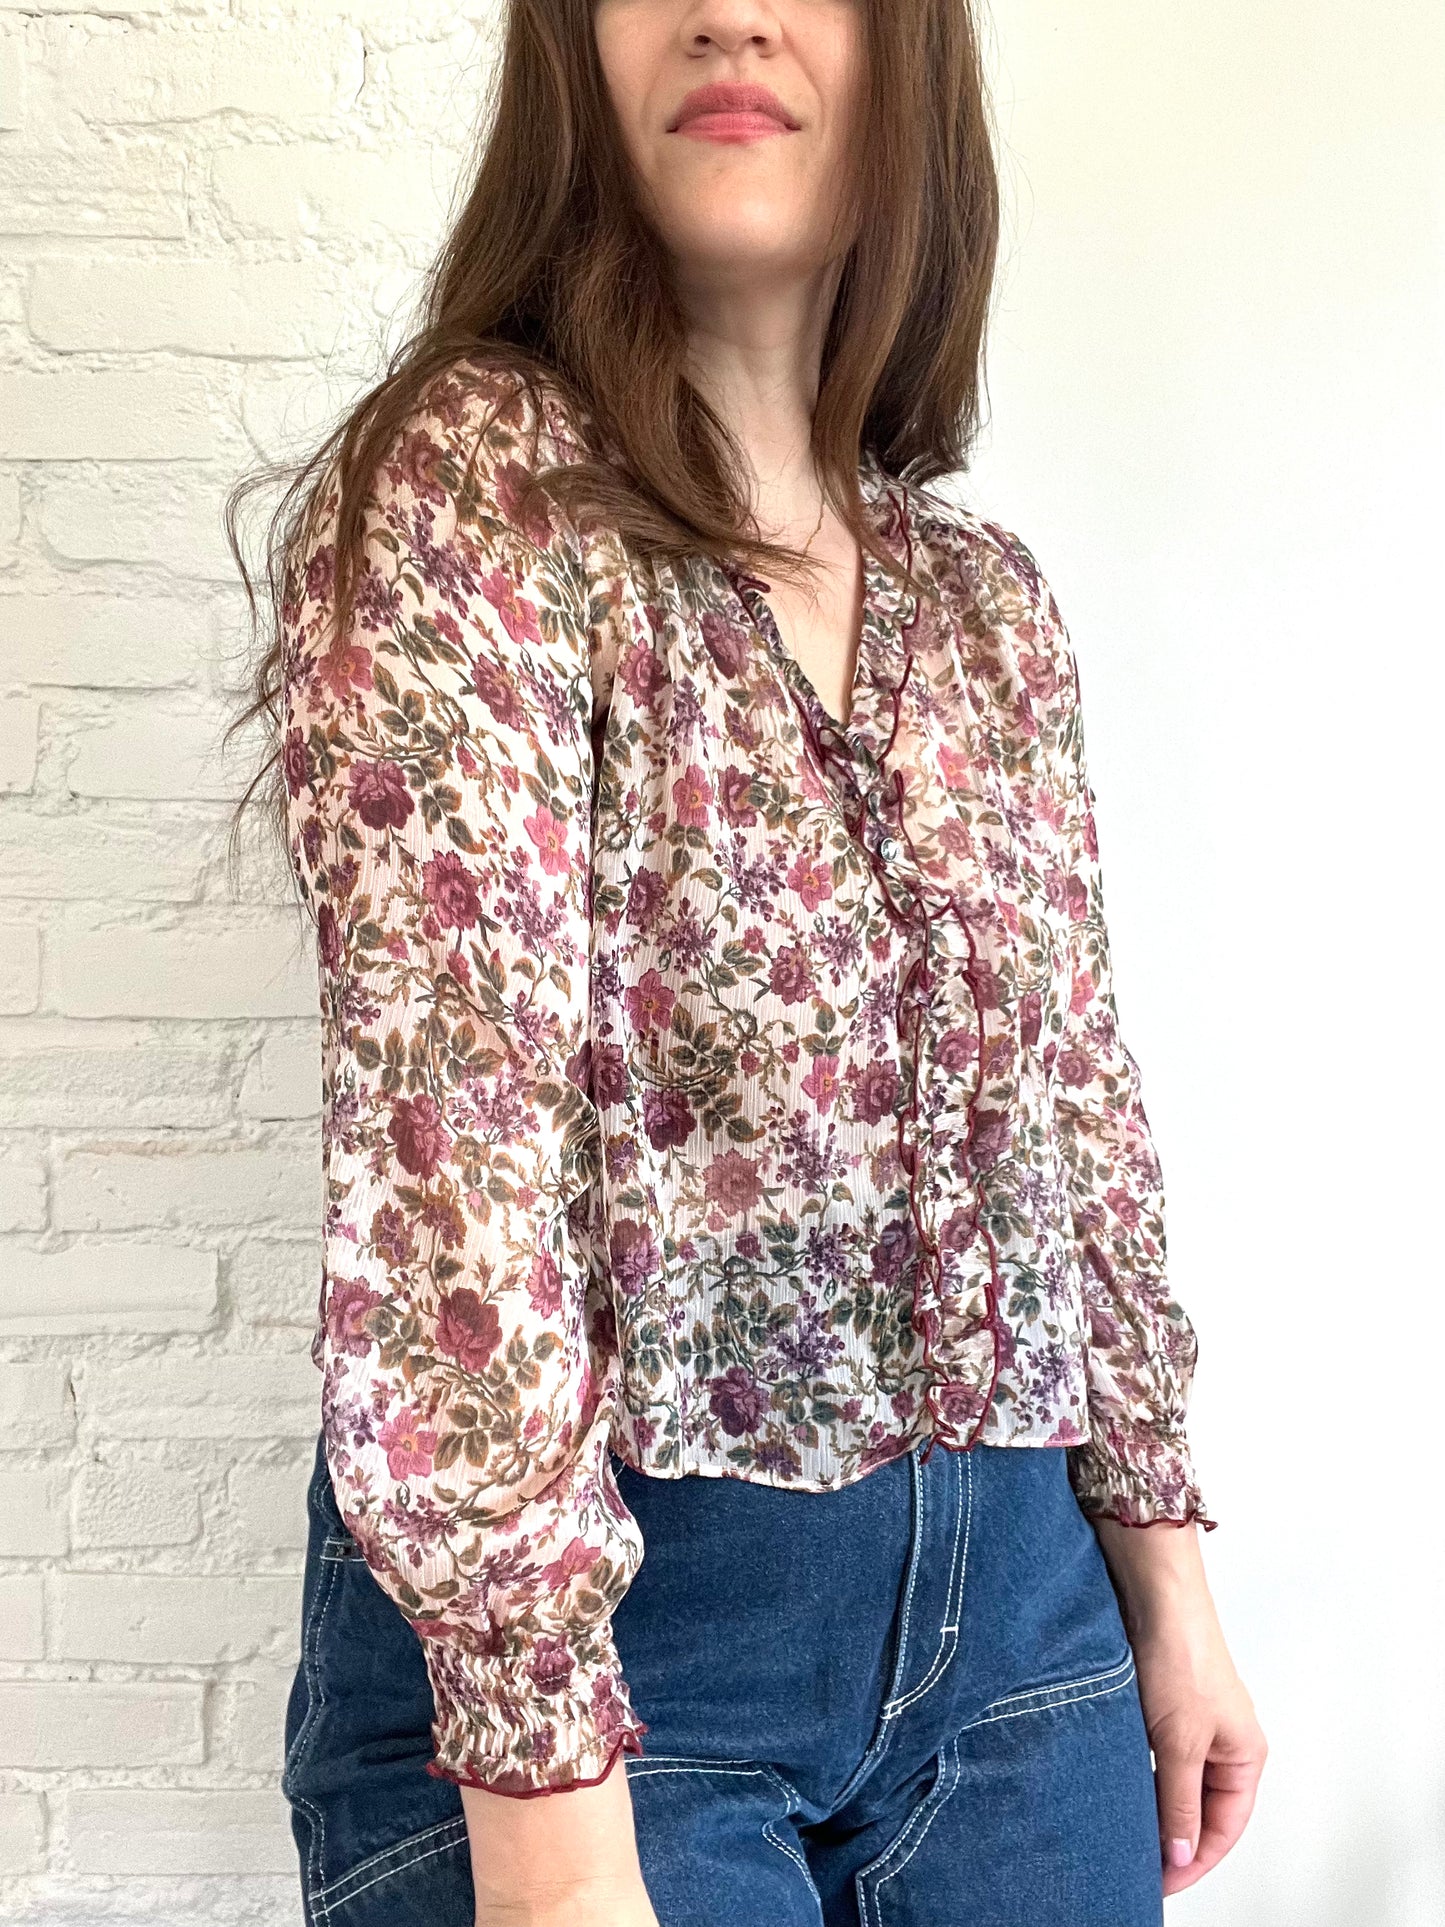 Sheer Floral Blouse - XS (oversized)